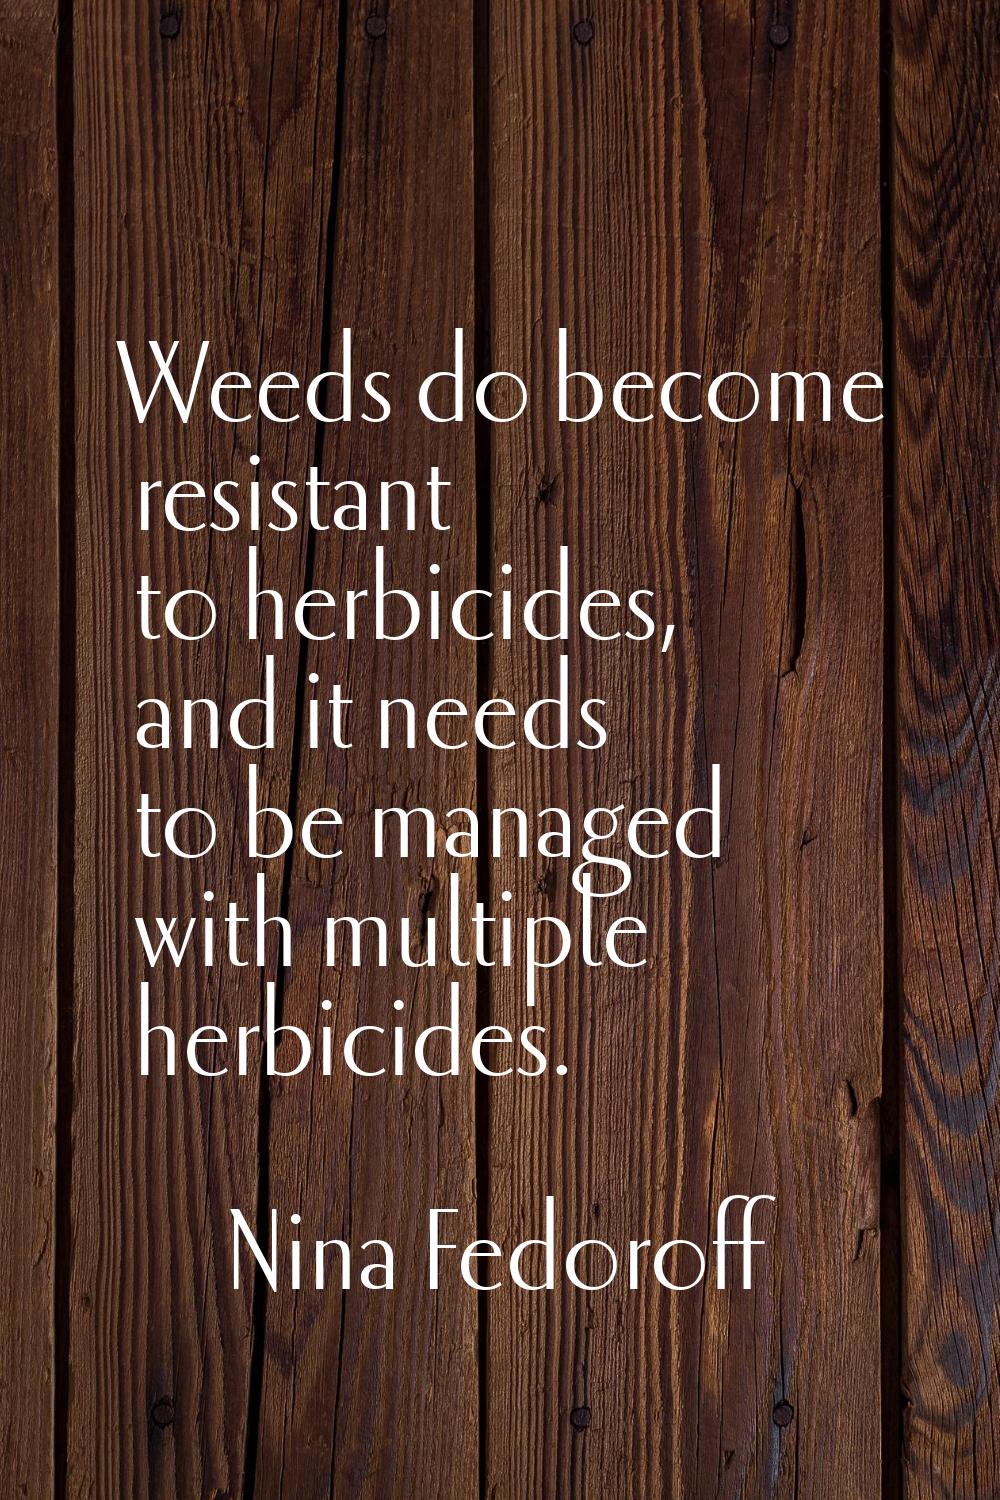 Weeds do become resistant to herbicides, and it needs to be managed with multiple herbicides.